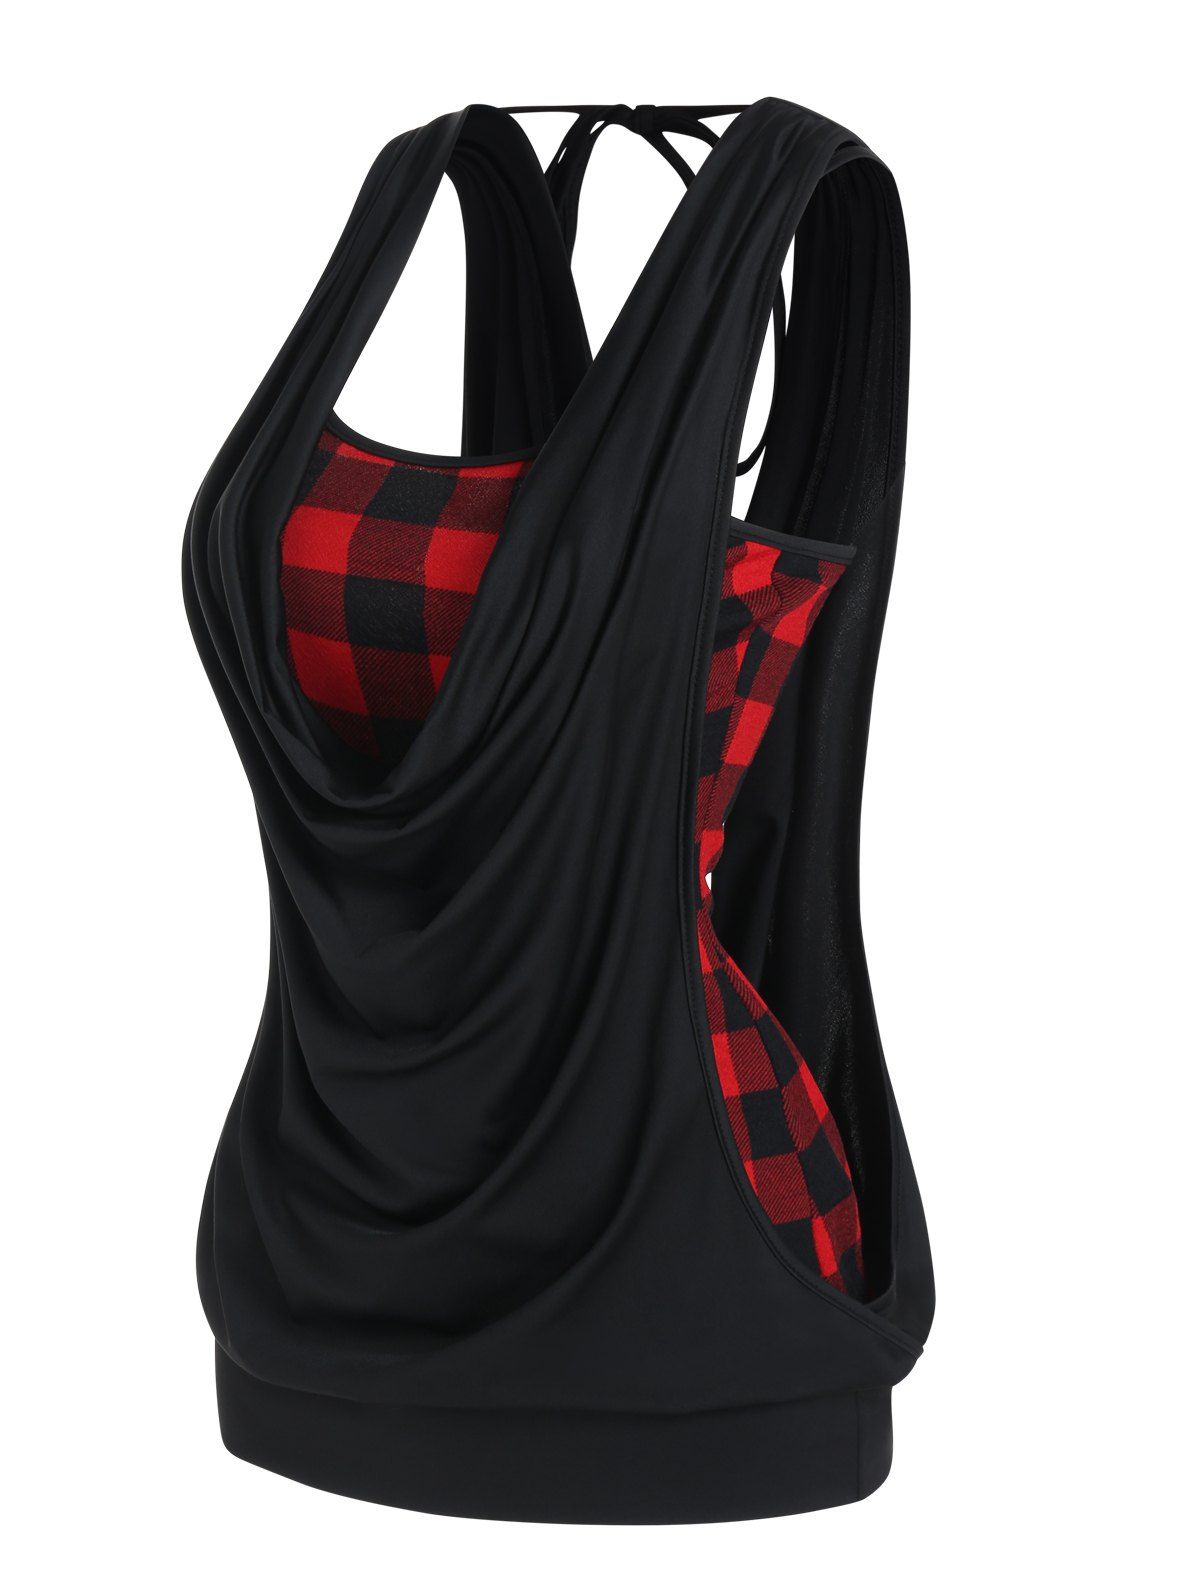 Casual Top Vintage Plaid Print Cami Top and Solid Color Draped Tied Back Tank Top Summer Two Piece Top Set - BLACK M